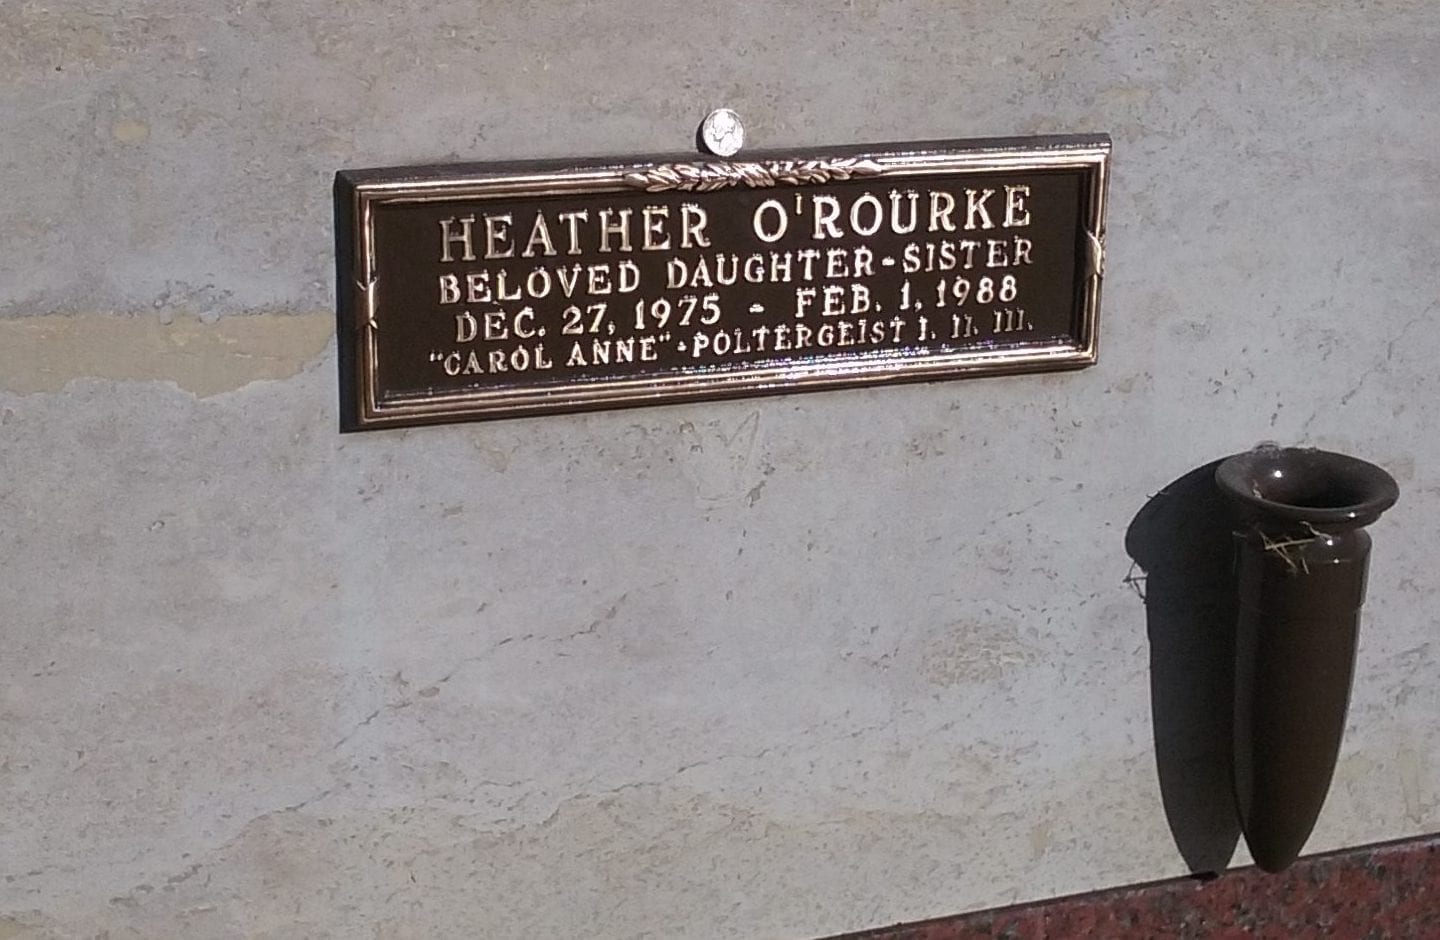 the grave stone of Heather O'Rourke, the actress who played Carol Anne in Poltergeist